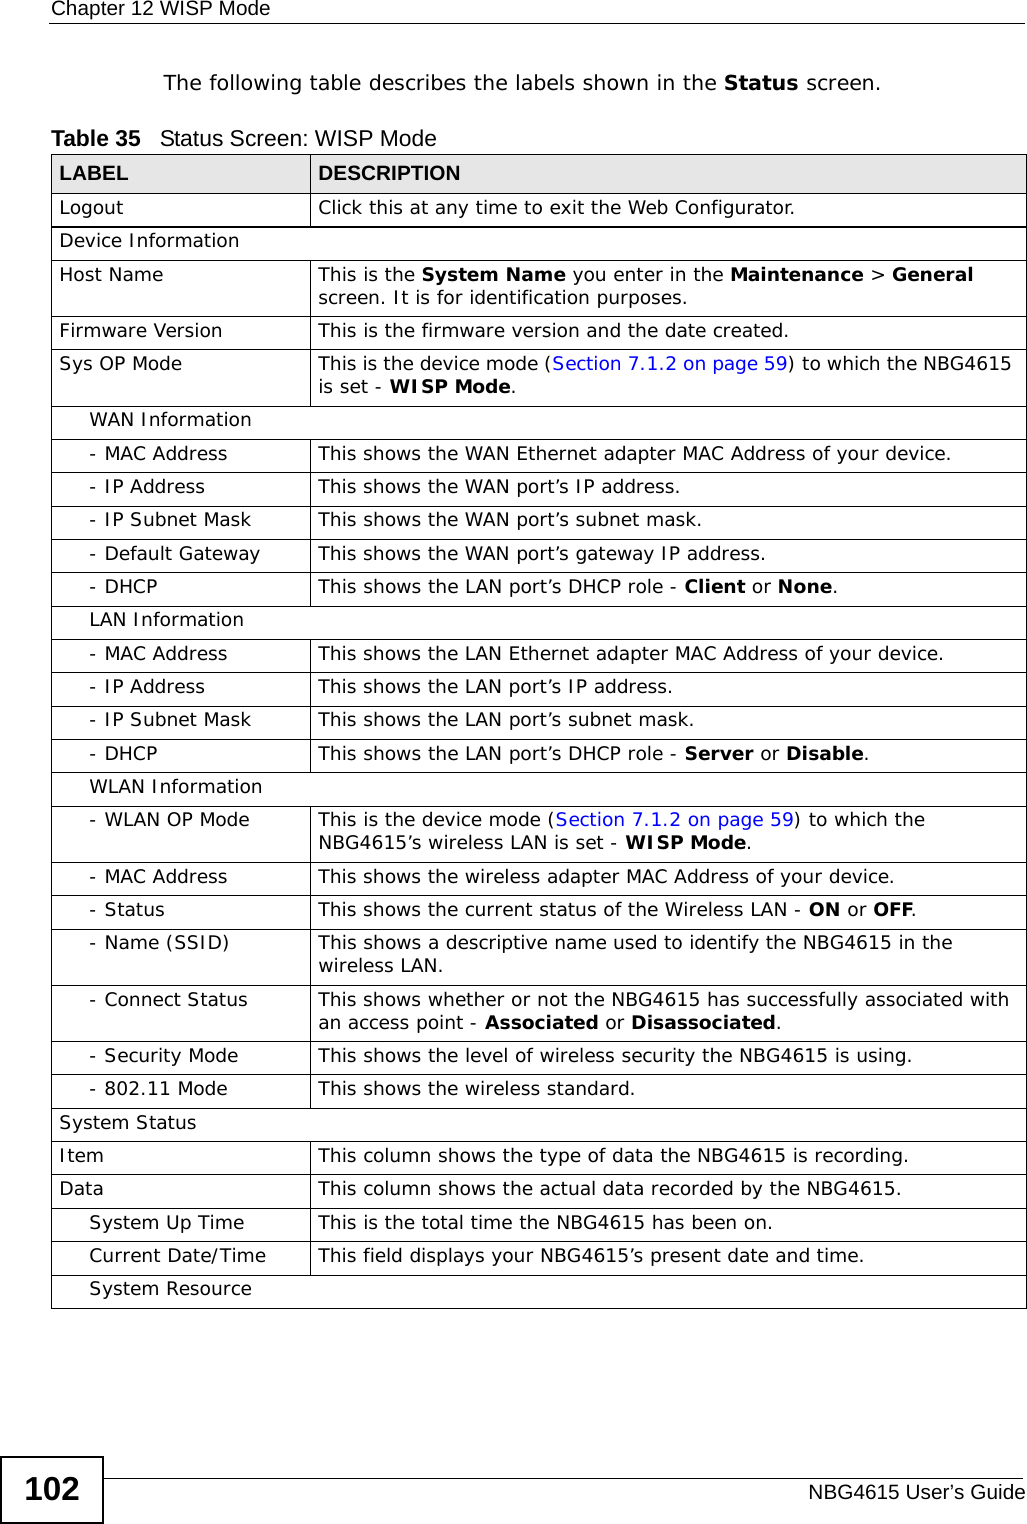 Chapter 12 WISP ModeNBG4615 User’s Guide102The following table describes the labels shown in the Status screen.Table 35   Status Screen: WISP Mode  LABEL DESCRIPTIONLogout Click this at any time to exit the Web Configurator.Device InformationHost Name This is the System Name you enter in the Maintenance &gt; General screen. It is for identification purposes.Firmware Version This is the firmware version and the date created. Sys OP Mode This is the device mode (Section 7.1.2 on page 59) to which the NBG4615 is set - WISP Mode.WAN Information- MAC Address This shows the WAN Ethernet adapter MAC Address of your device.- IP Address This shows the WAN port’s IP address.- IP Subnet Mask This shows the WAN port’s subnet mask.- Default Gateway This shows the WAN port’s gateway IP address.- DHCP This shows the LAN port’s DHCP role - Client or None.LAN Information- MAC Address This shows the LAN Ethernet adapter MAC Address of your device.- IP Address This shows the LAN port’s IP address.- IP Subnet Mask This shows the LAN port’s subnet mask.- DHCP This shows the LAN port’s DHCP role - Server or Disable.WLAN Information- WLAN OP Mode This is the device mode (Section 7.1.2 on page 59) to which the NBG4615’s wireless LAN is set - WISP Mode.- MAC Address This shows the wireless adapter MAC Address of your device.- Status This shows the current status of the Wireless LAN - ON or OFF.- Name (SSID) This shows a descriptive name used to identify the NBG4615 in the wireless LAN. - Connect Status This shows whether or not the NBG4615 has successfully associated with an access point - Associated or Disassociated.- Security Mode This shows the level of wireless security the NBG4615 is using.- 802.11 Mode This shows the wireless standard.System StatusItem This column shows the type of data the NBG4615 is recording.Data This column shows the actual data recorded by the NBG4615.System Up Time This is the total time the NBG4615 has been on.Current Date/Time This field displays your NBG4615’s present date and time.System Resource